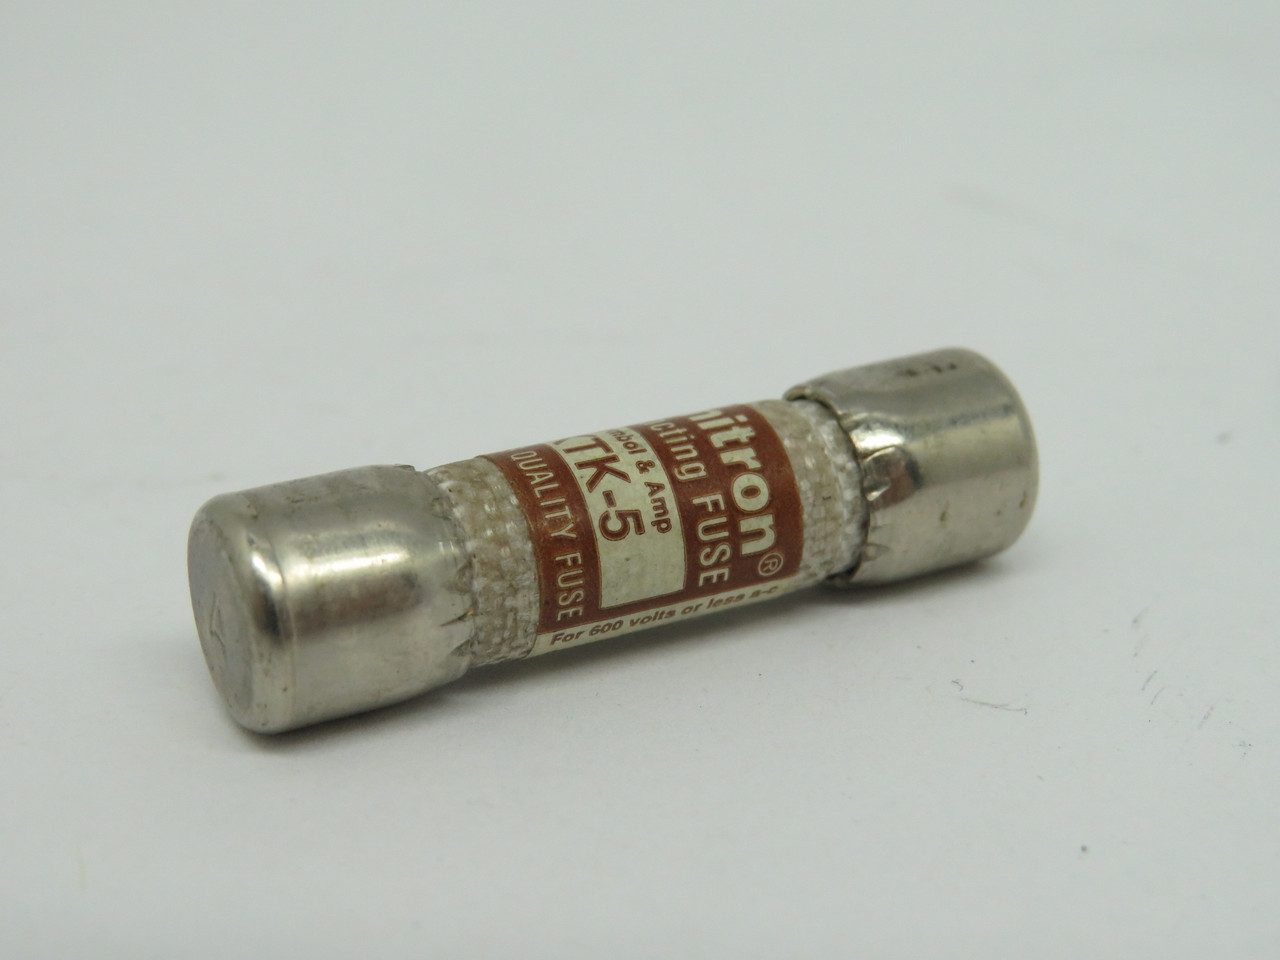 Limitron KTK-5 Fast Acting Fuse 5A 600V USED